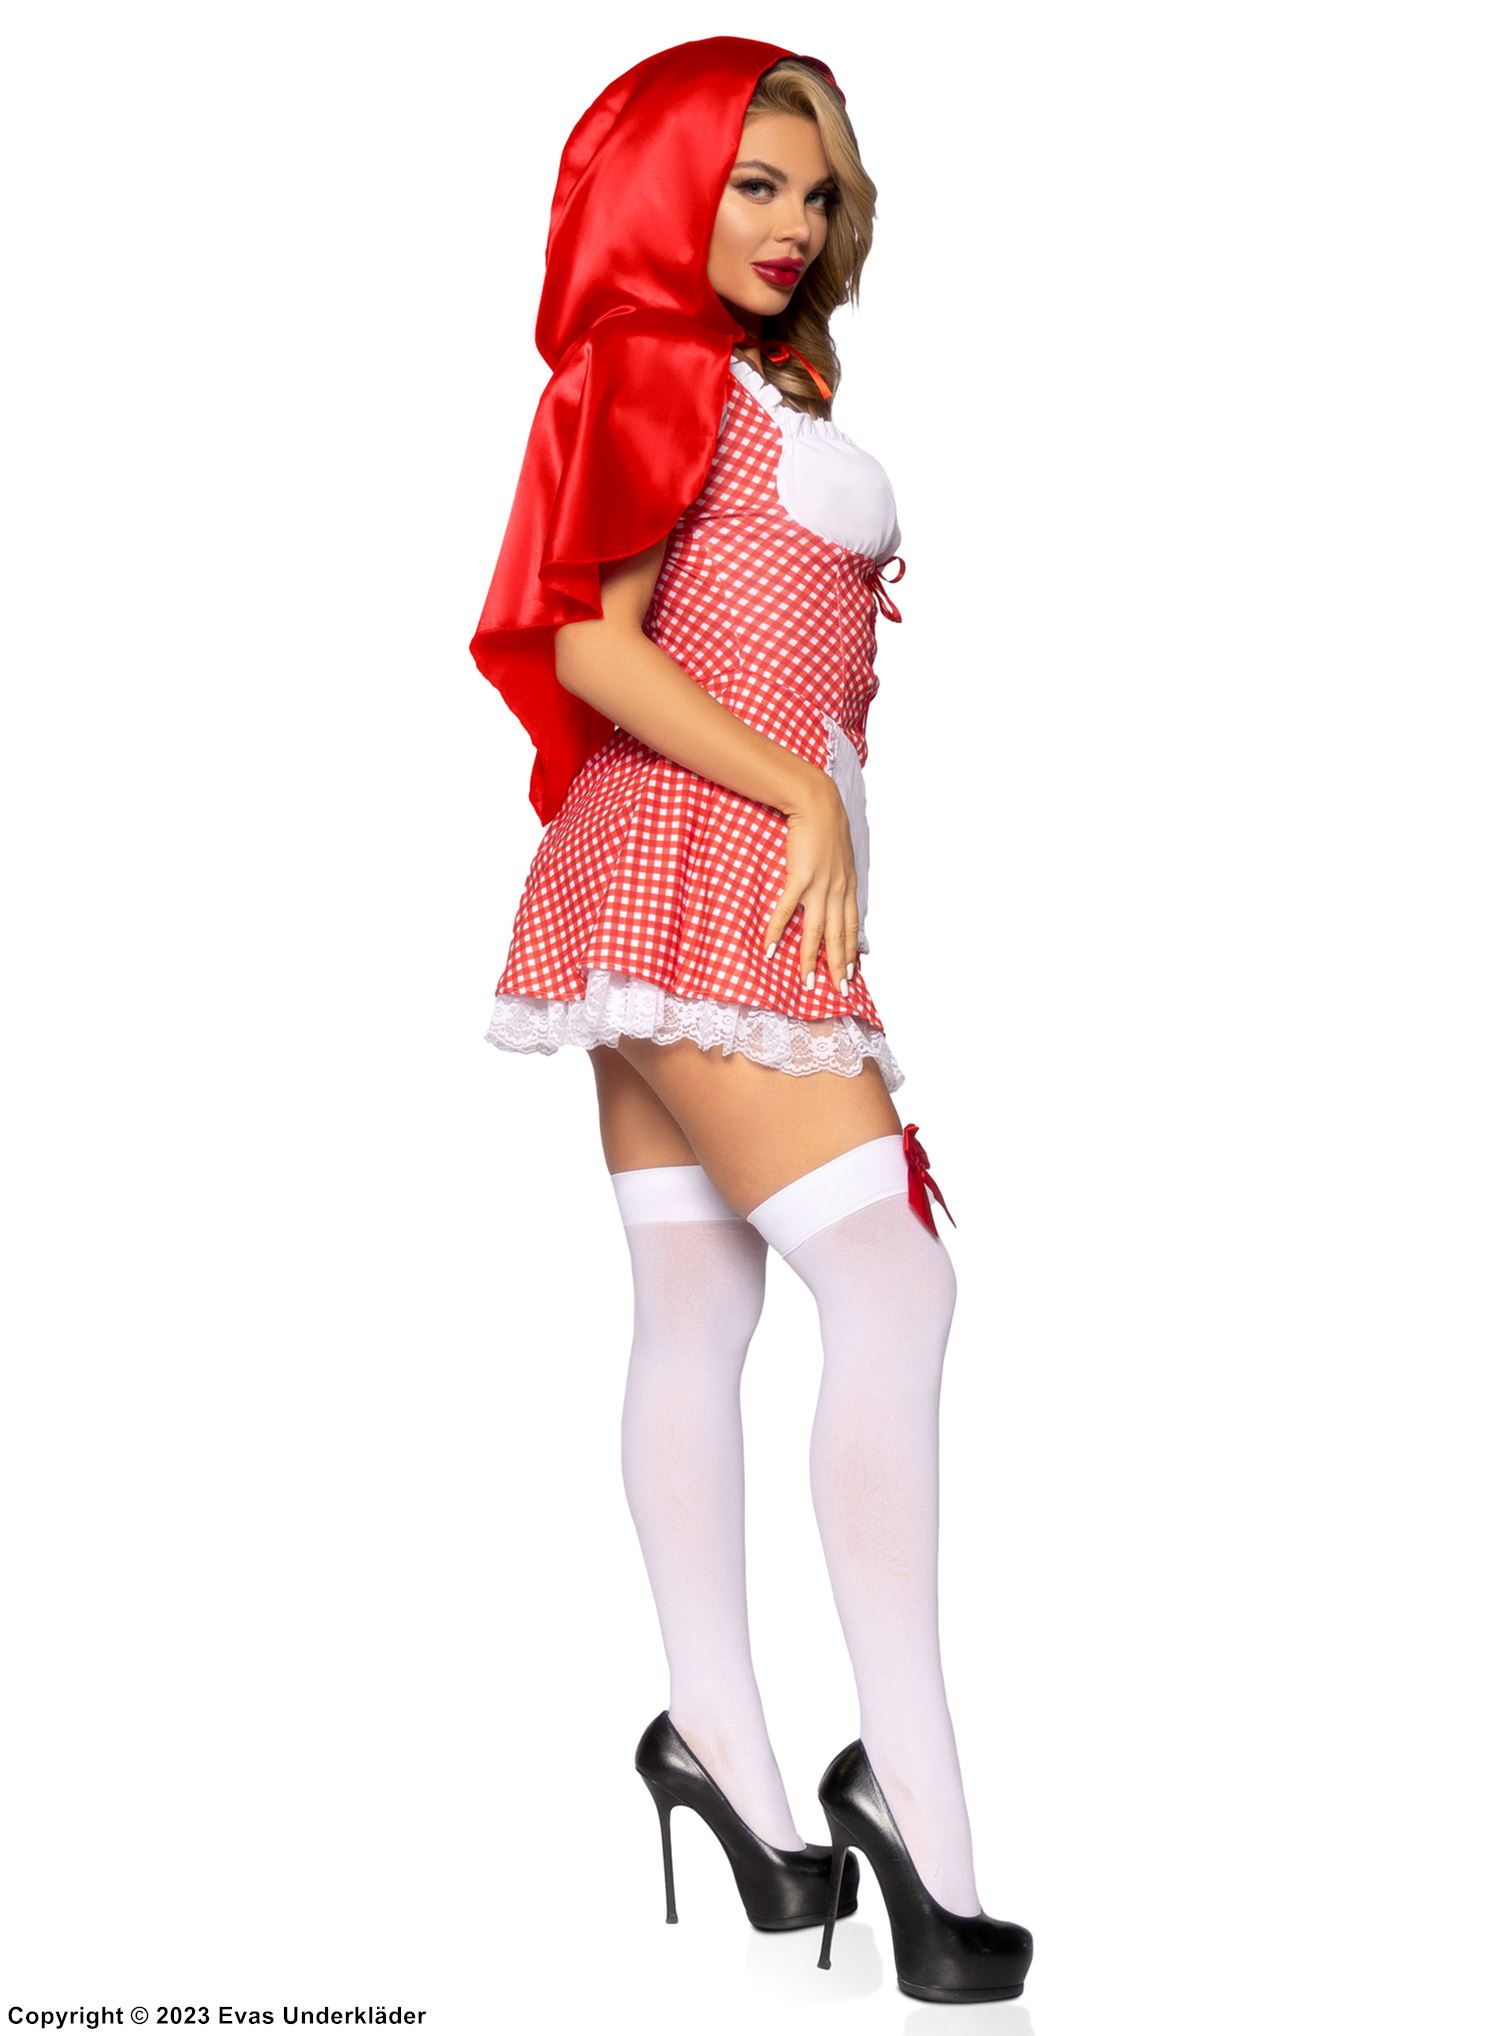 Red Riding Hood, costume dress, lacing, puff sleeves, scott-checkered pattern